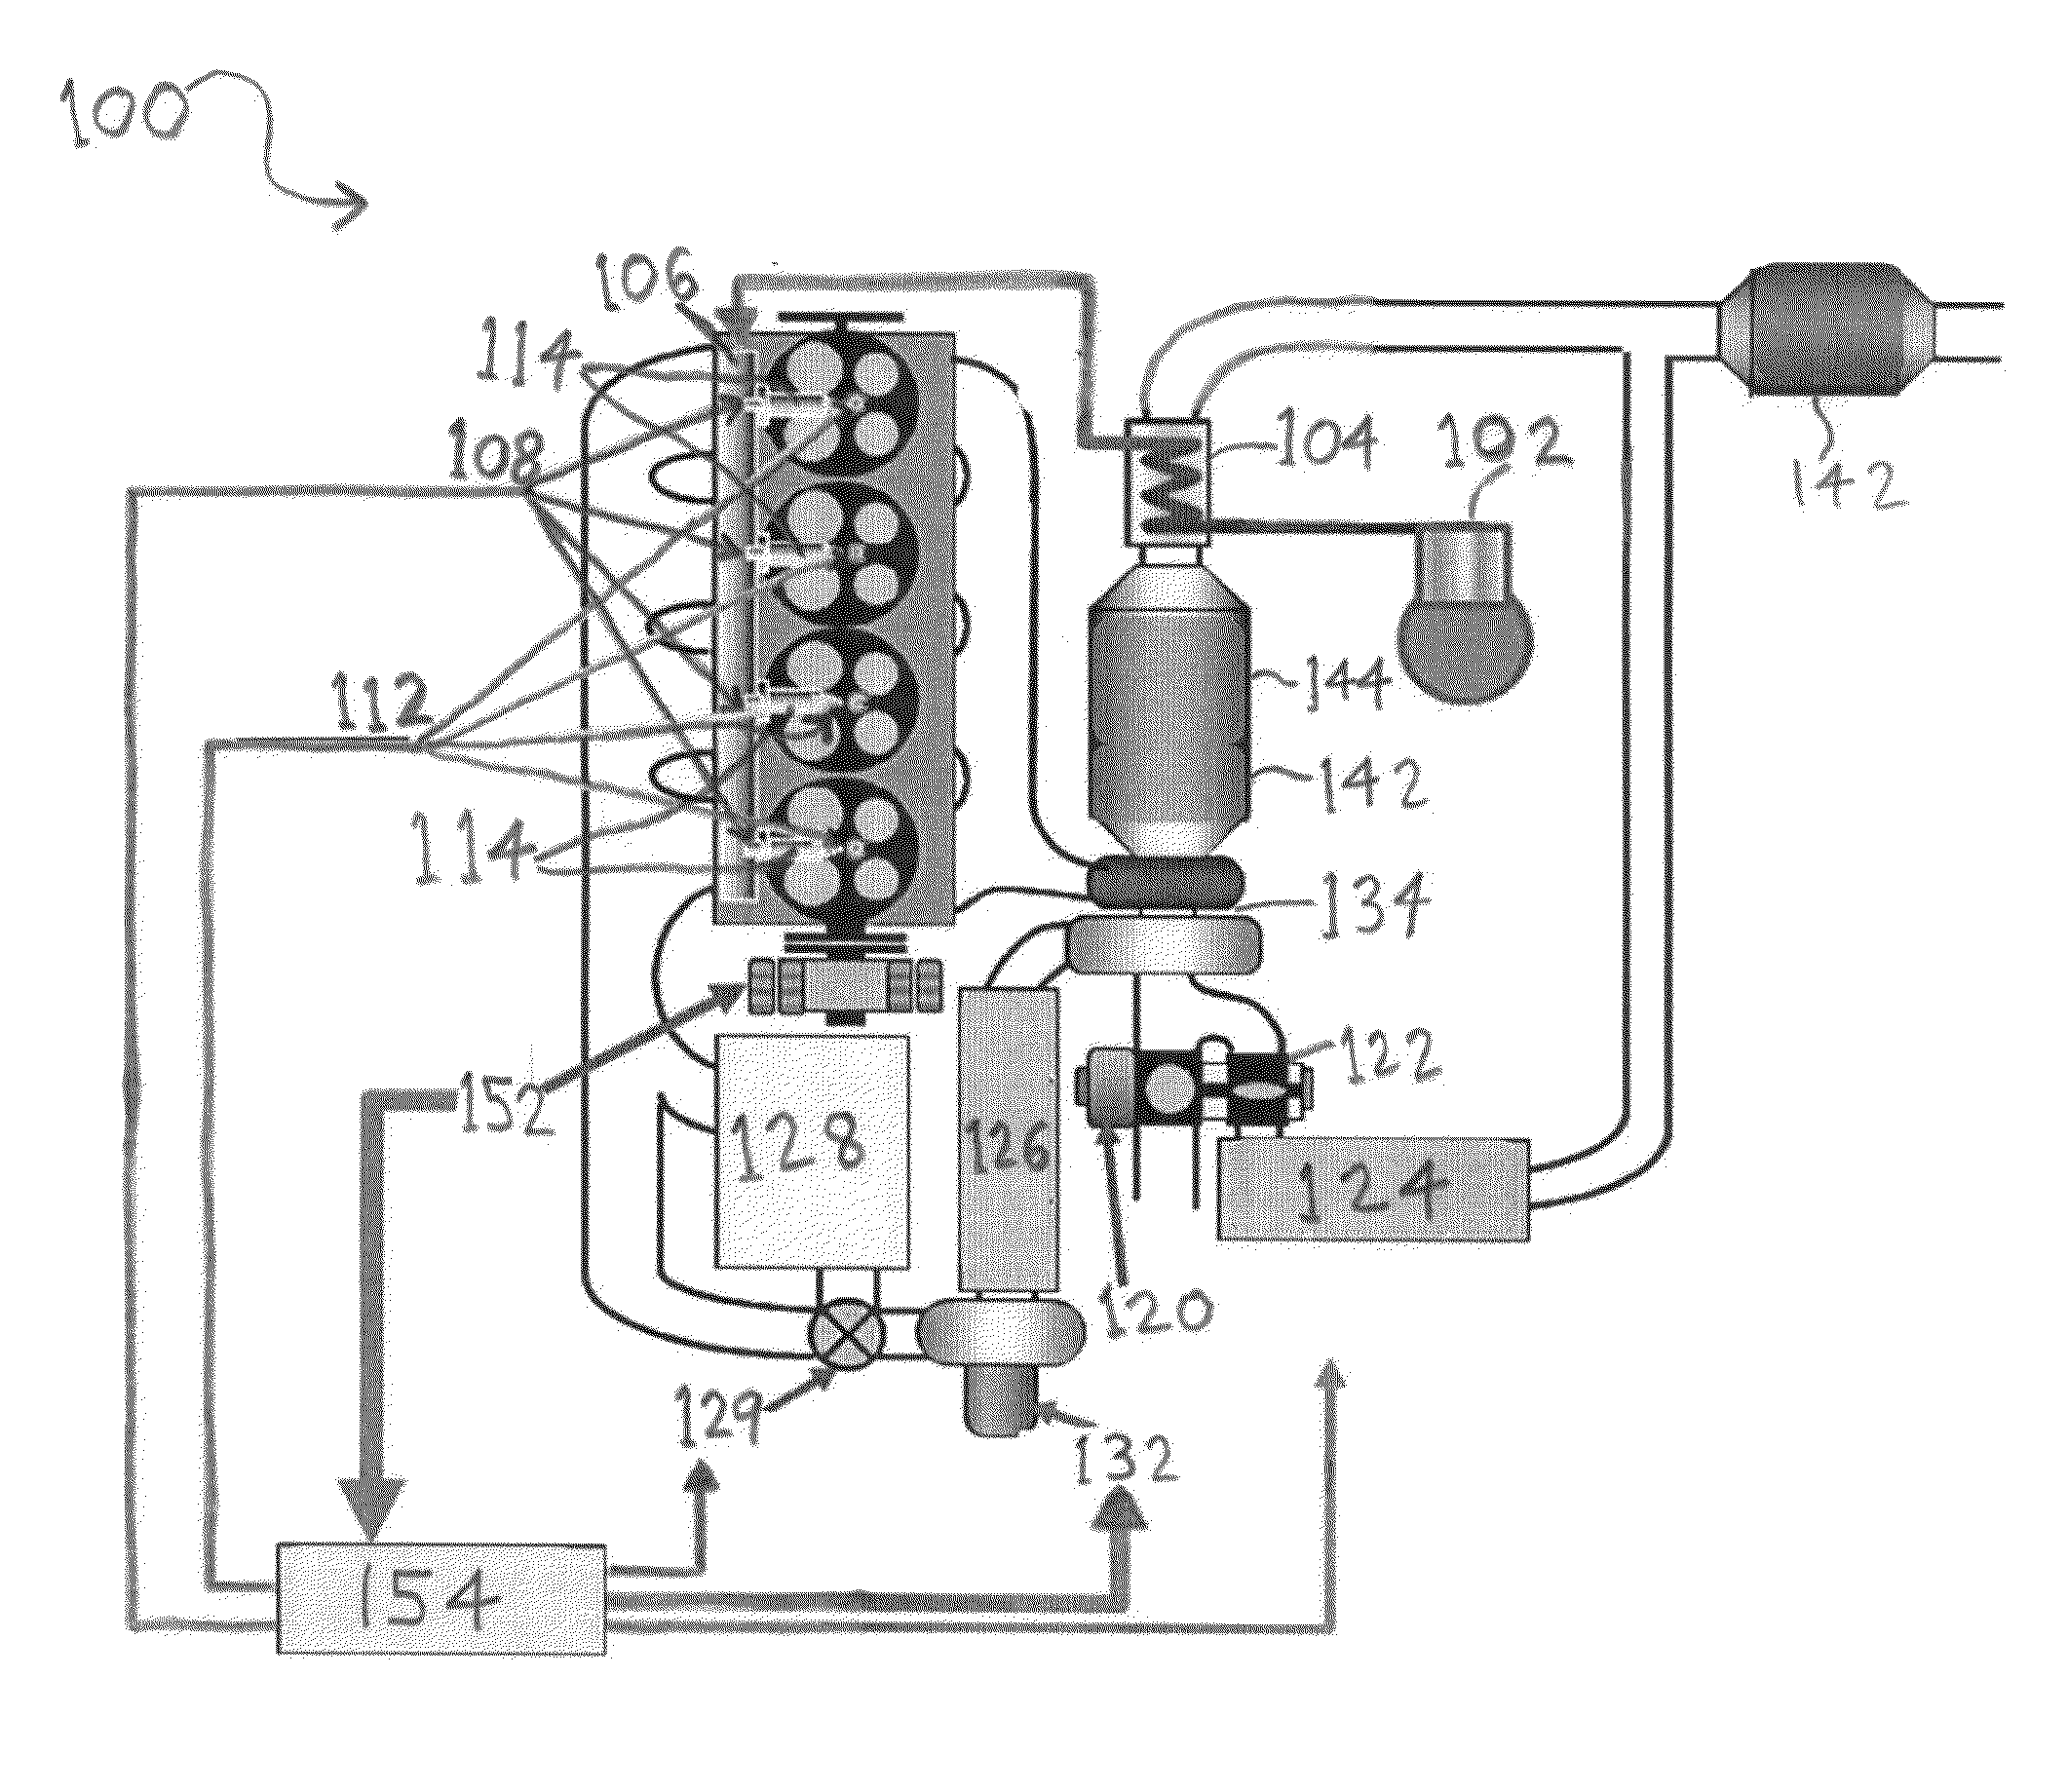 Internal combustion engine with high temperature fuel injection